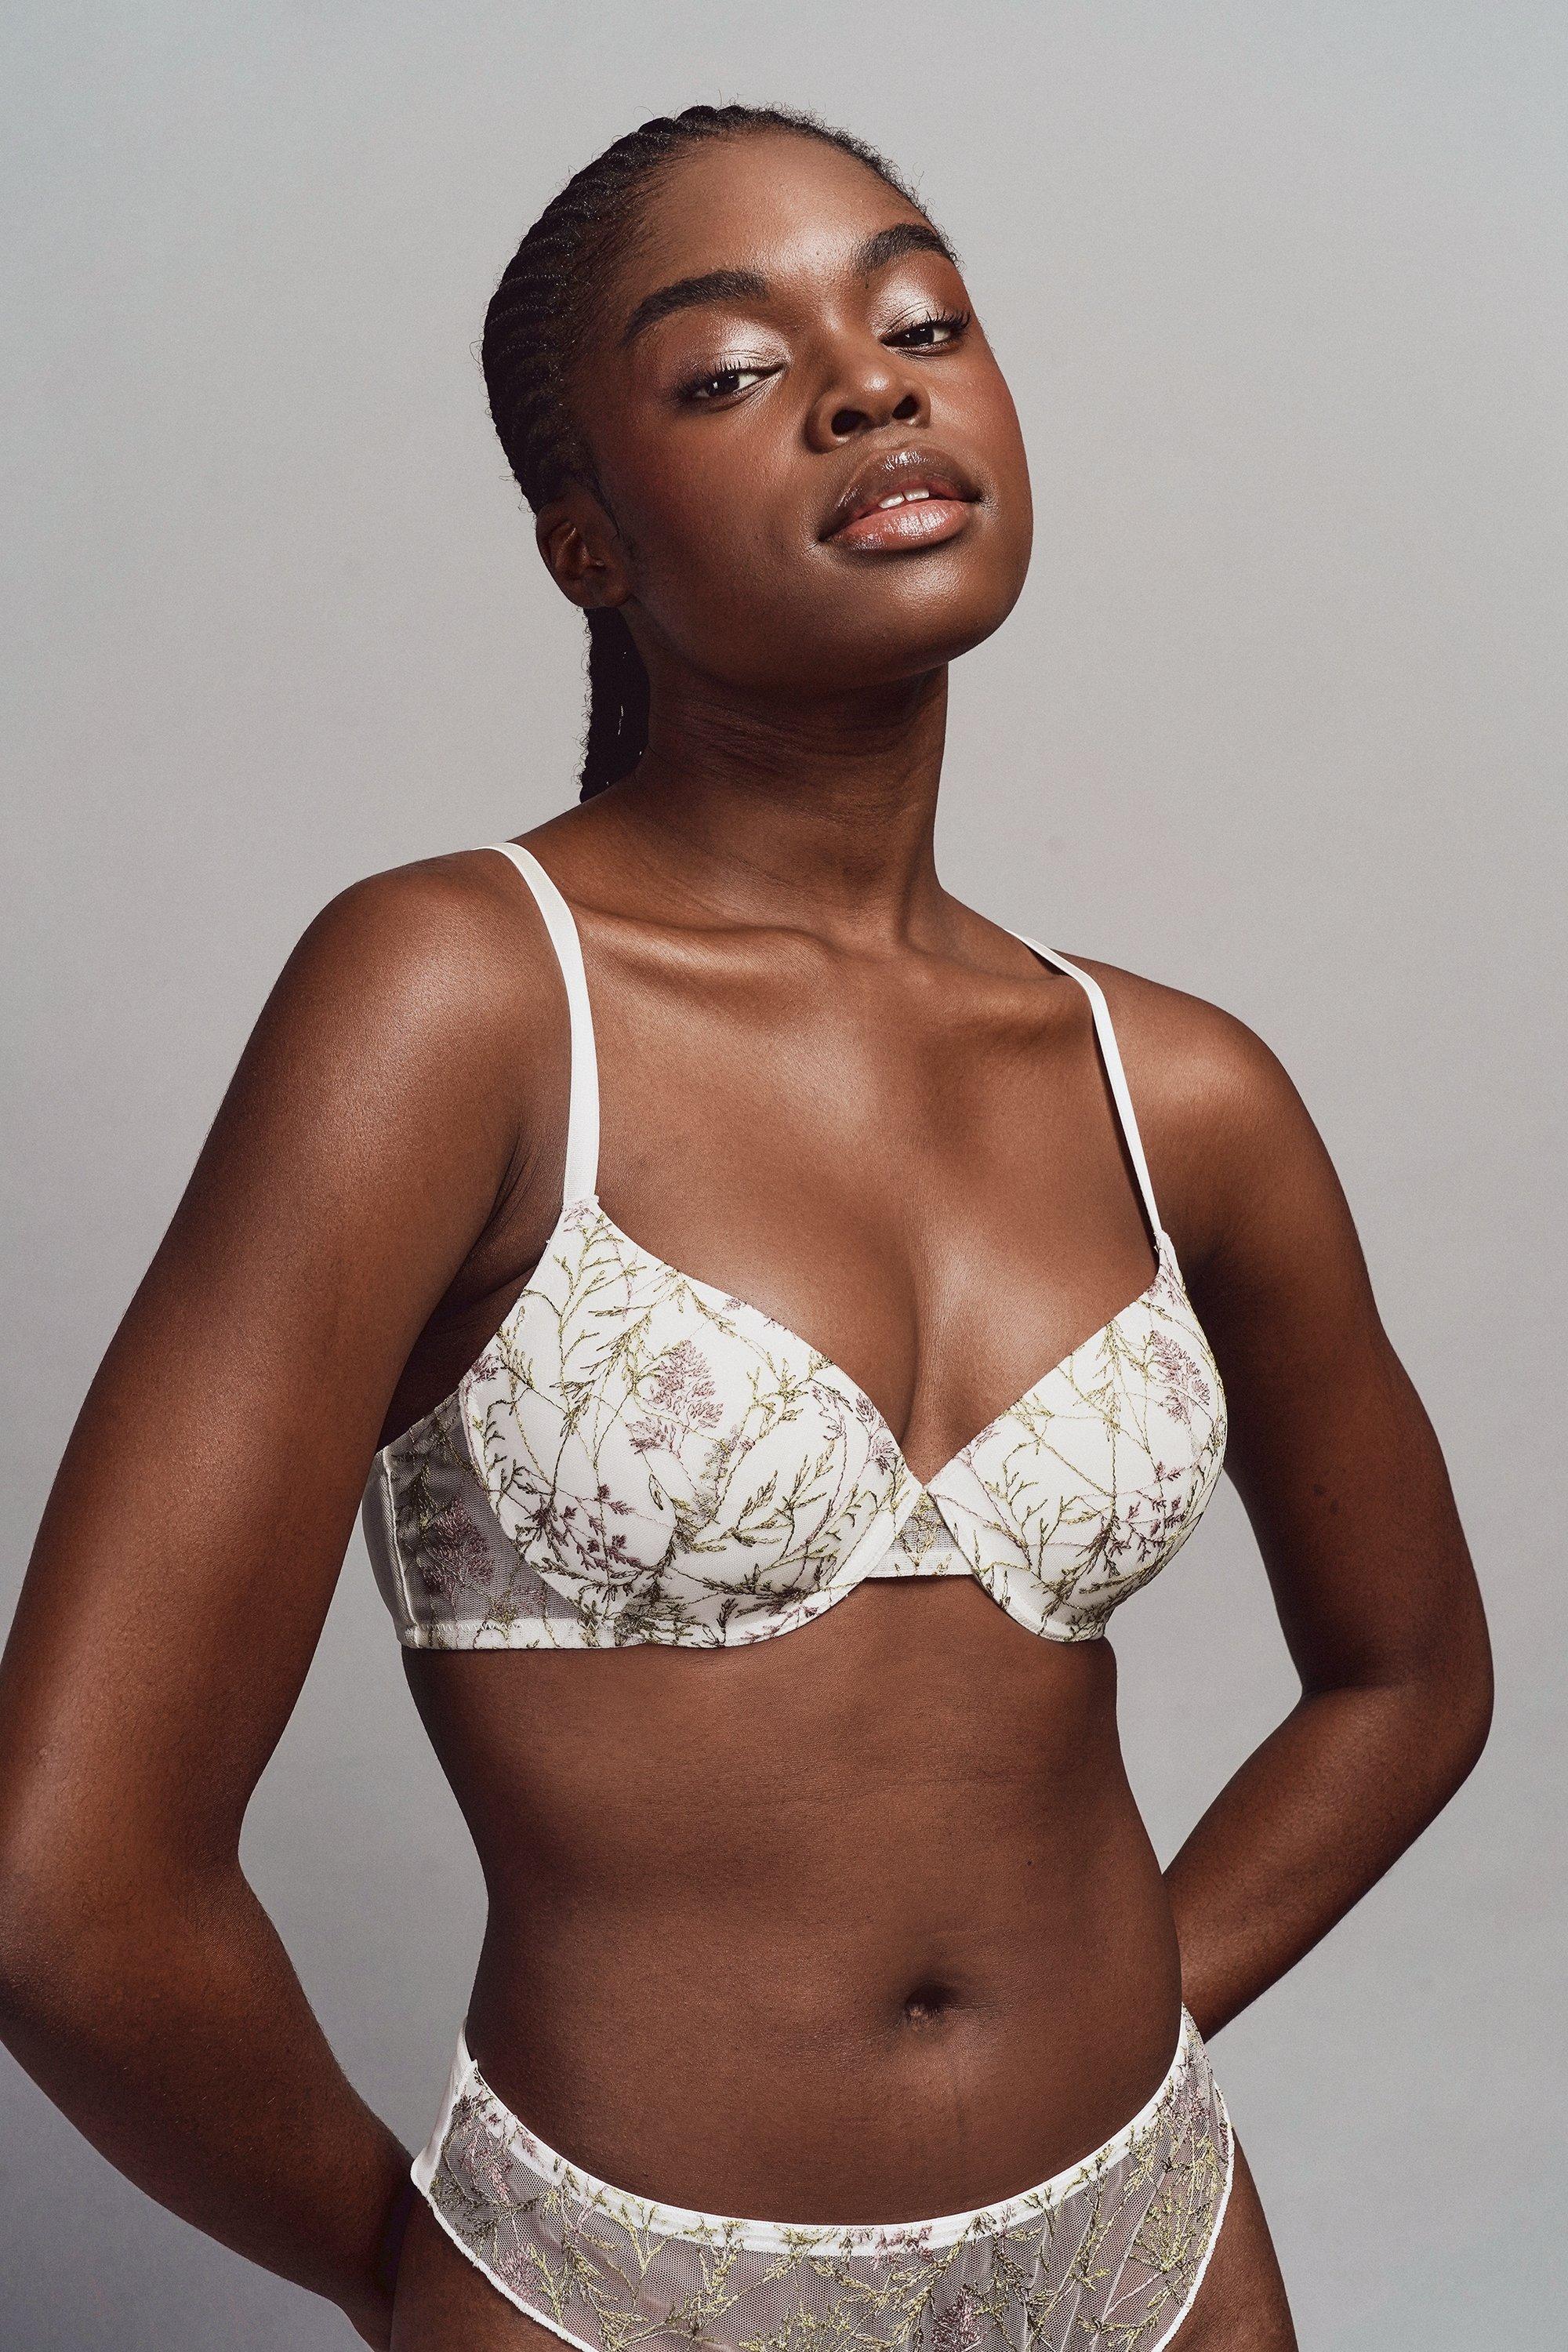 What's the Difference Between a Bralette Vs. Bra?